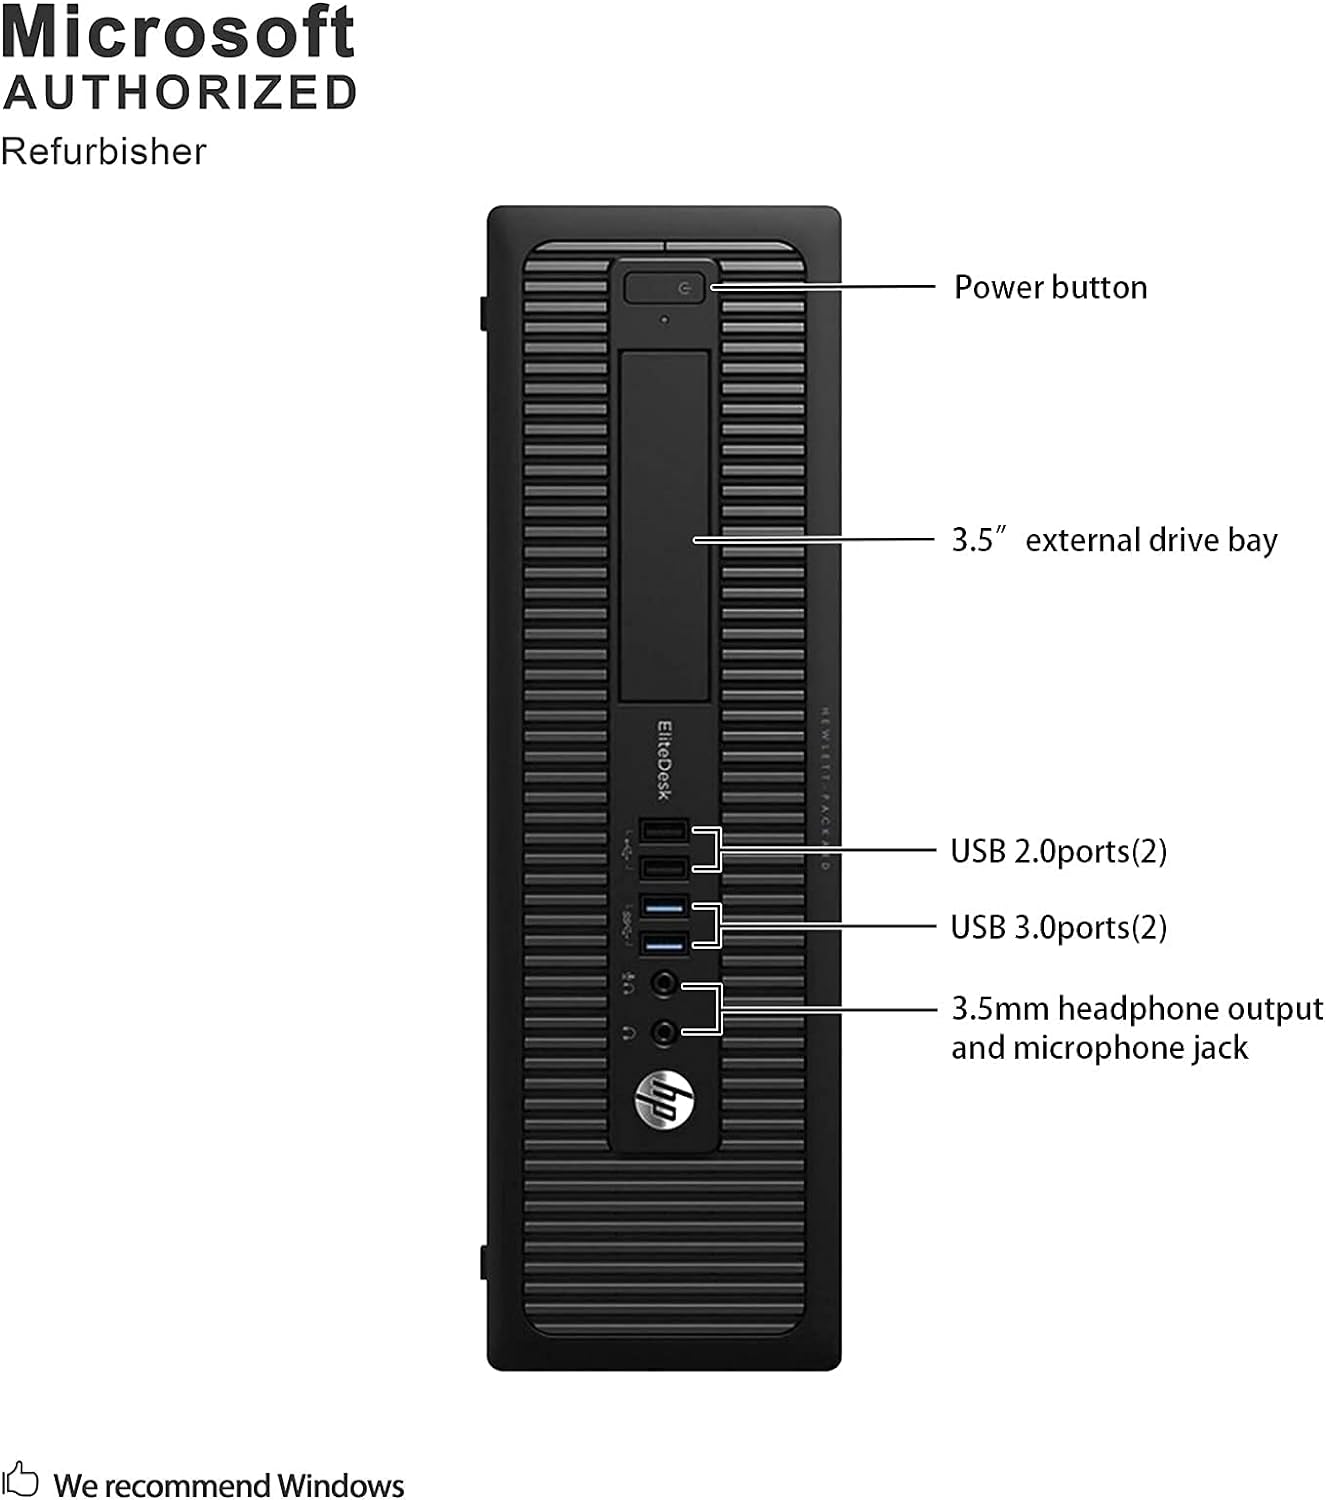 HP EliteDesk 705 G1 Small Form Factor PC, AMD Quad A10 PRO-7800B up to 3.9GHz, 8G DDR3, 500G, DVD, WiFi, BT 4.0, Windows 10 Pro 64 Bit-Multi-Language Supports English/Spanish/French(Renewed)